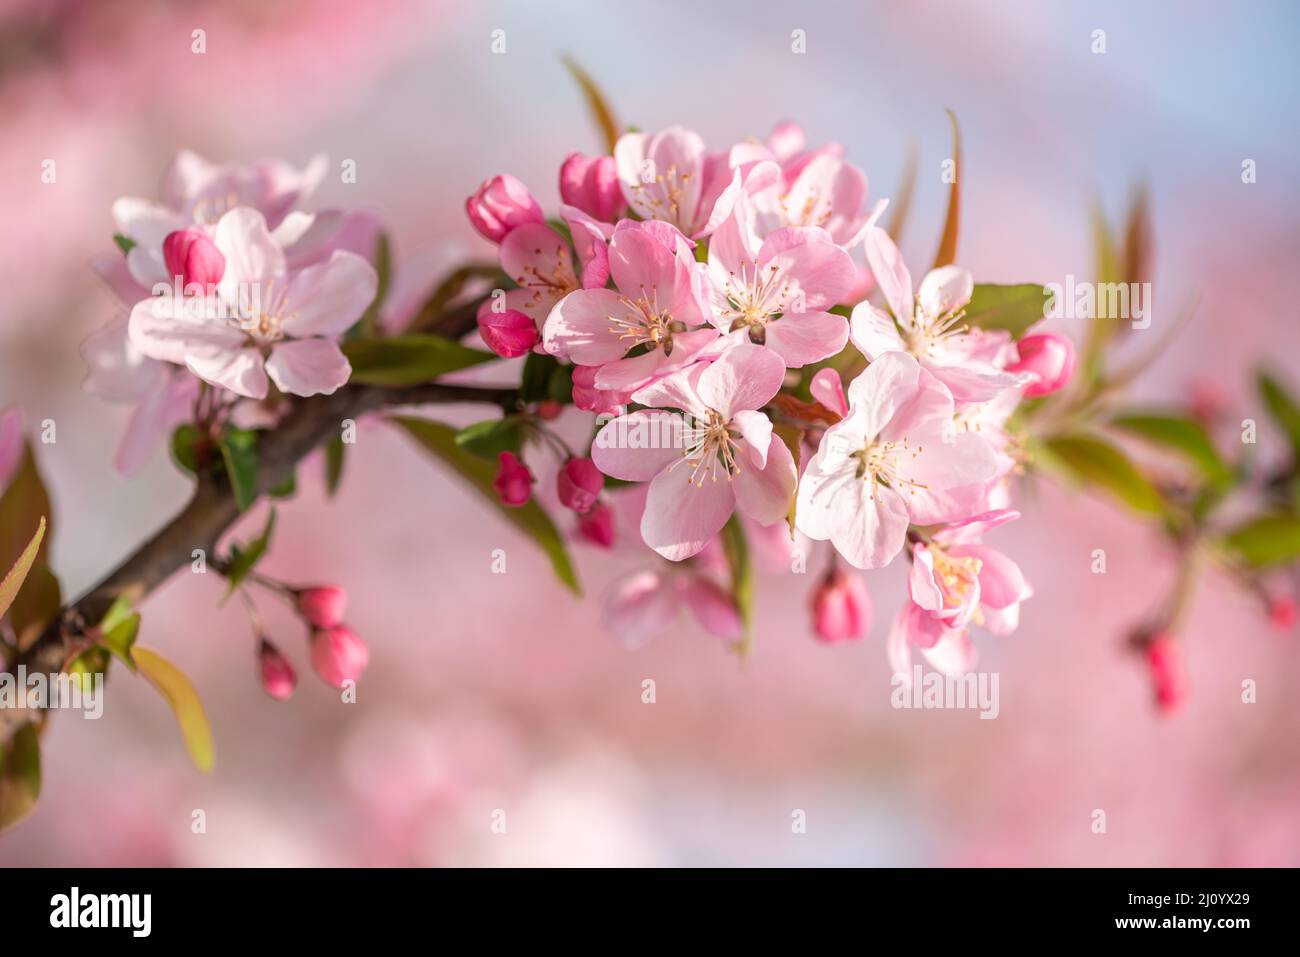 Peach tree flowers against blue sky close-up view Stock Photo